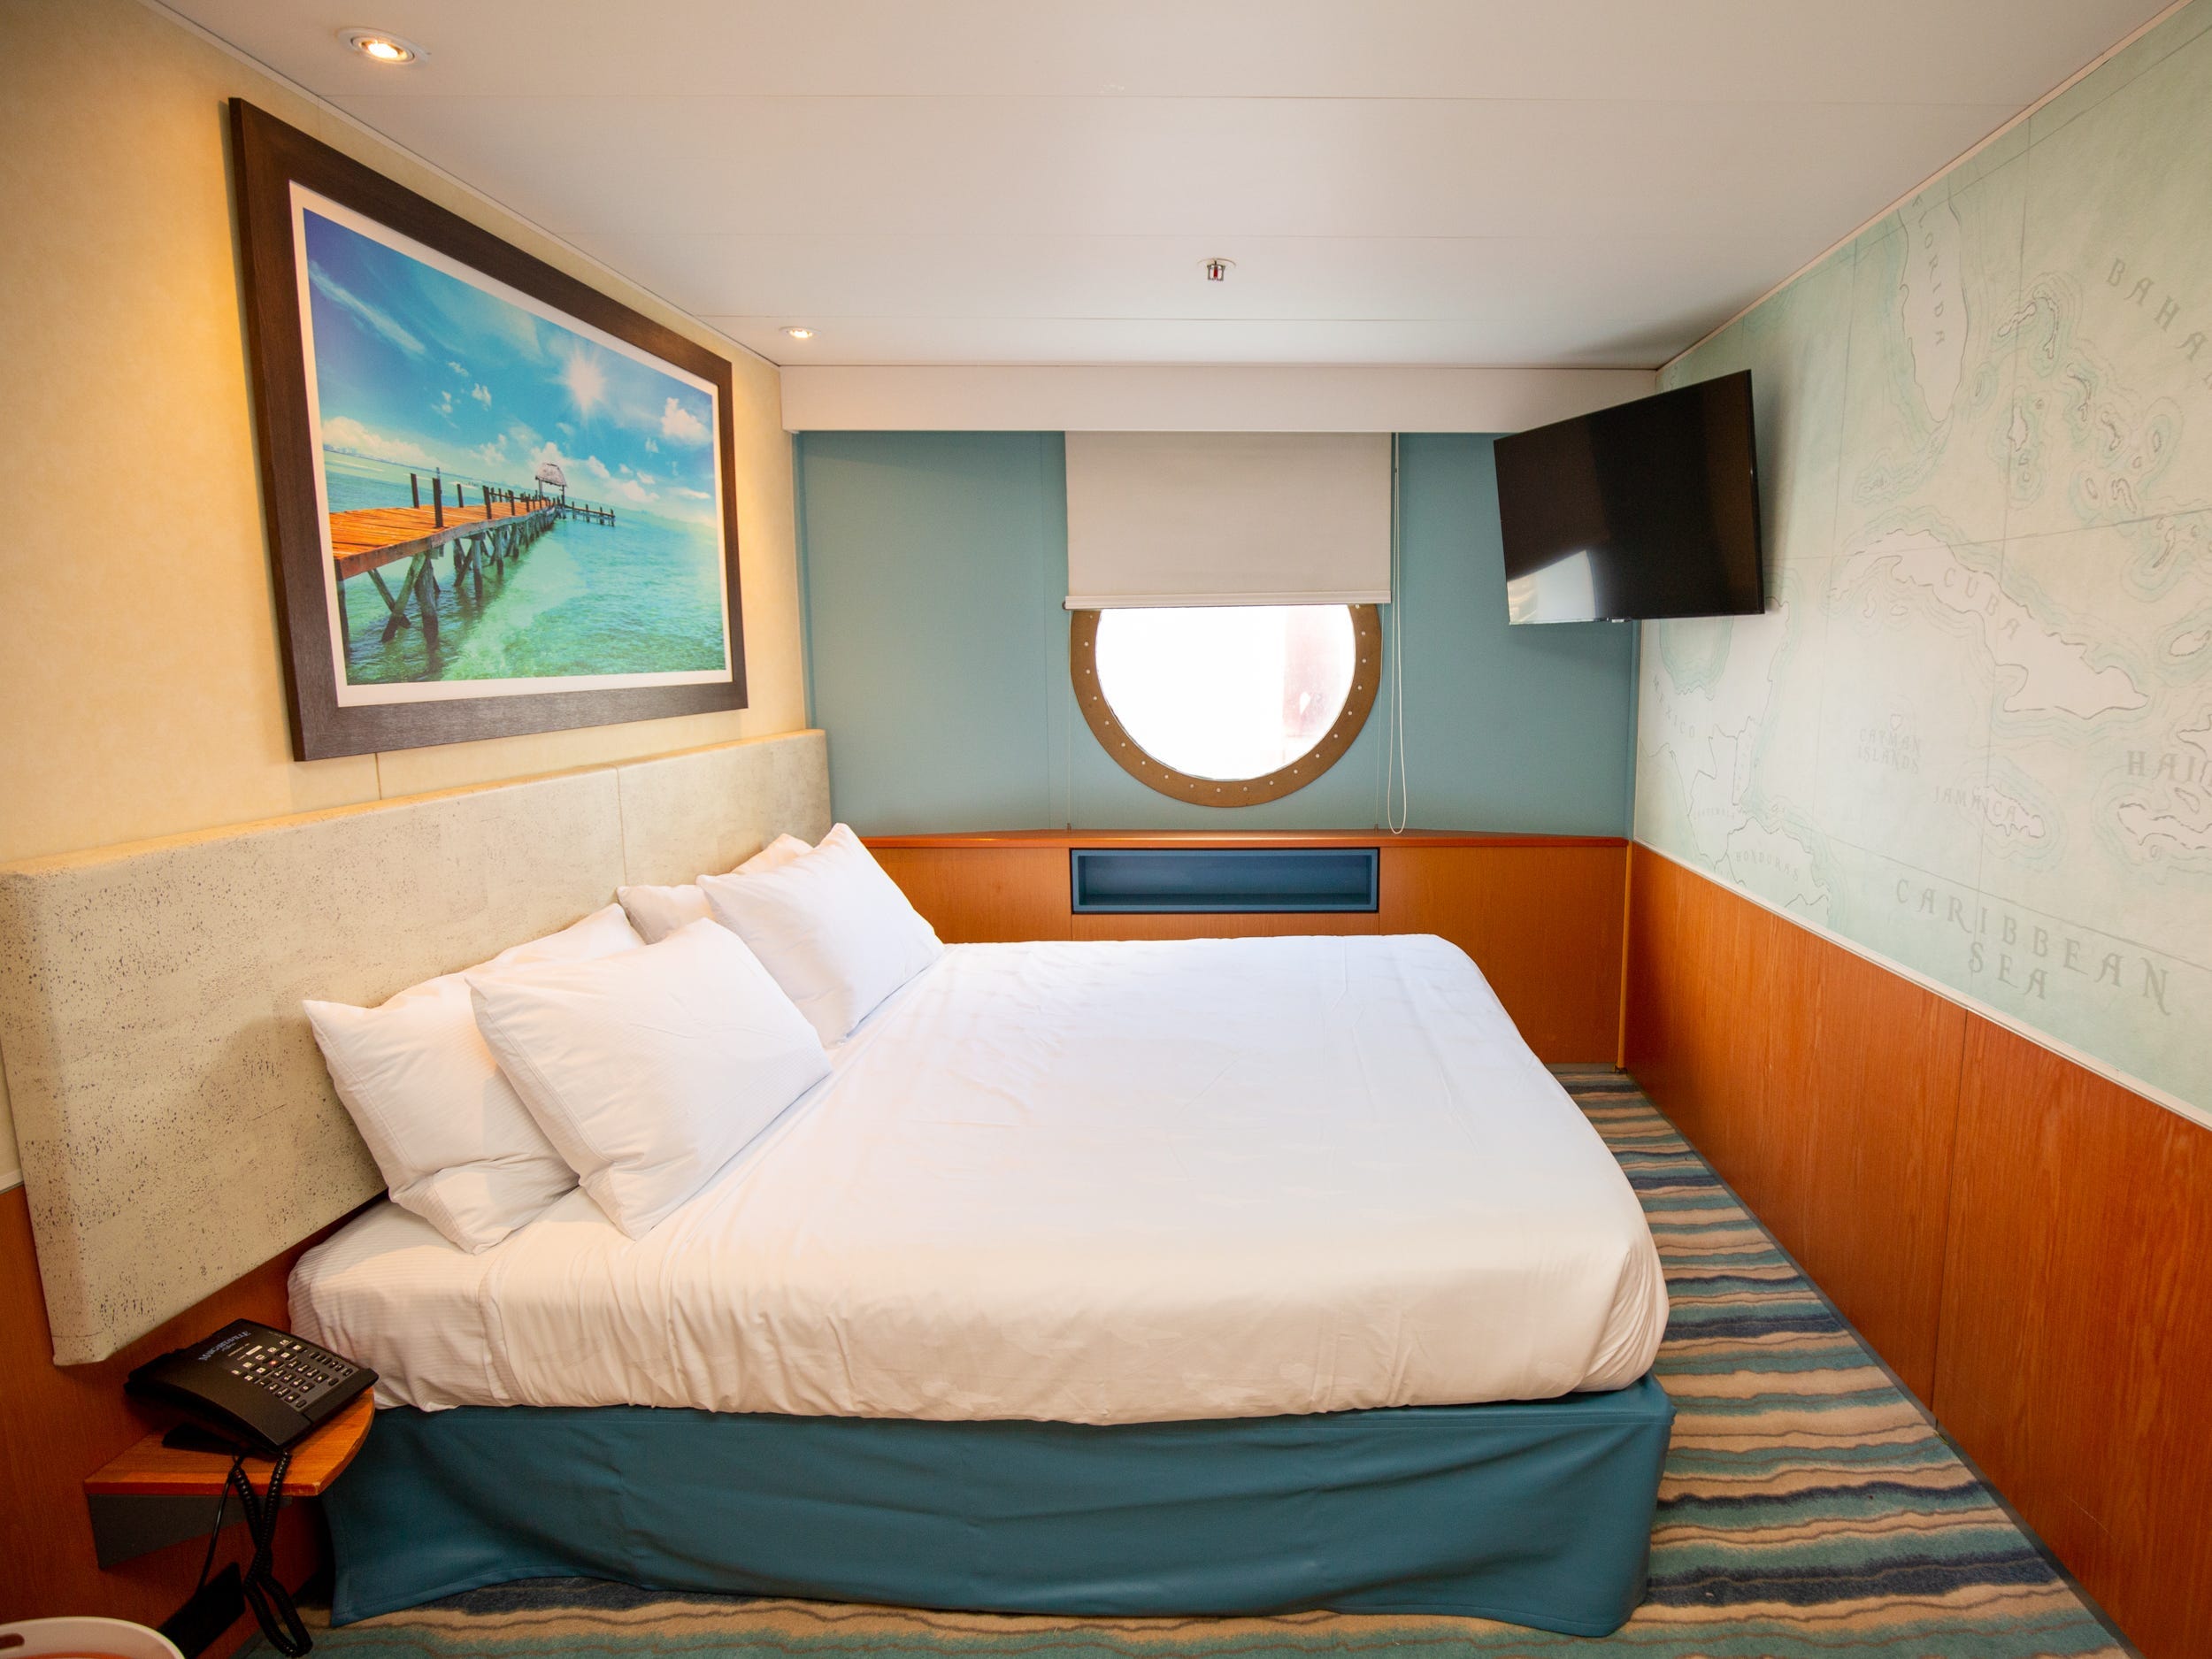 <p>The photo above shows my stateroom before the update. But photos in the review show a stateroom decorated similarly to <a href="https://www.businessinsider.com/photos-i-sailed-margairatvilles-new-cruise-ship-wont-again-2022-5">what I saw in 2022</a>. Their refreshed stateroom also had <a href="https://www.insider.com/margaritaville-at-sea-renovated-room-tour-interior-stateroom-photos-2023-7">appliances that were either missing or weren't functioning properly,</a> a lack of Margaritaville branding, and furniture that didn't align with what was shown on the company's website. </p><p>These were<a href="https://www.businessinsider.com/margaritaville%20at%20sea-cruise-line-stateroom-review-2022-5"> similar to the gripes </a>I had last year.</p>